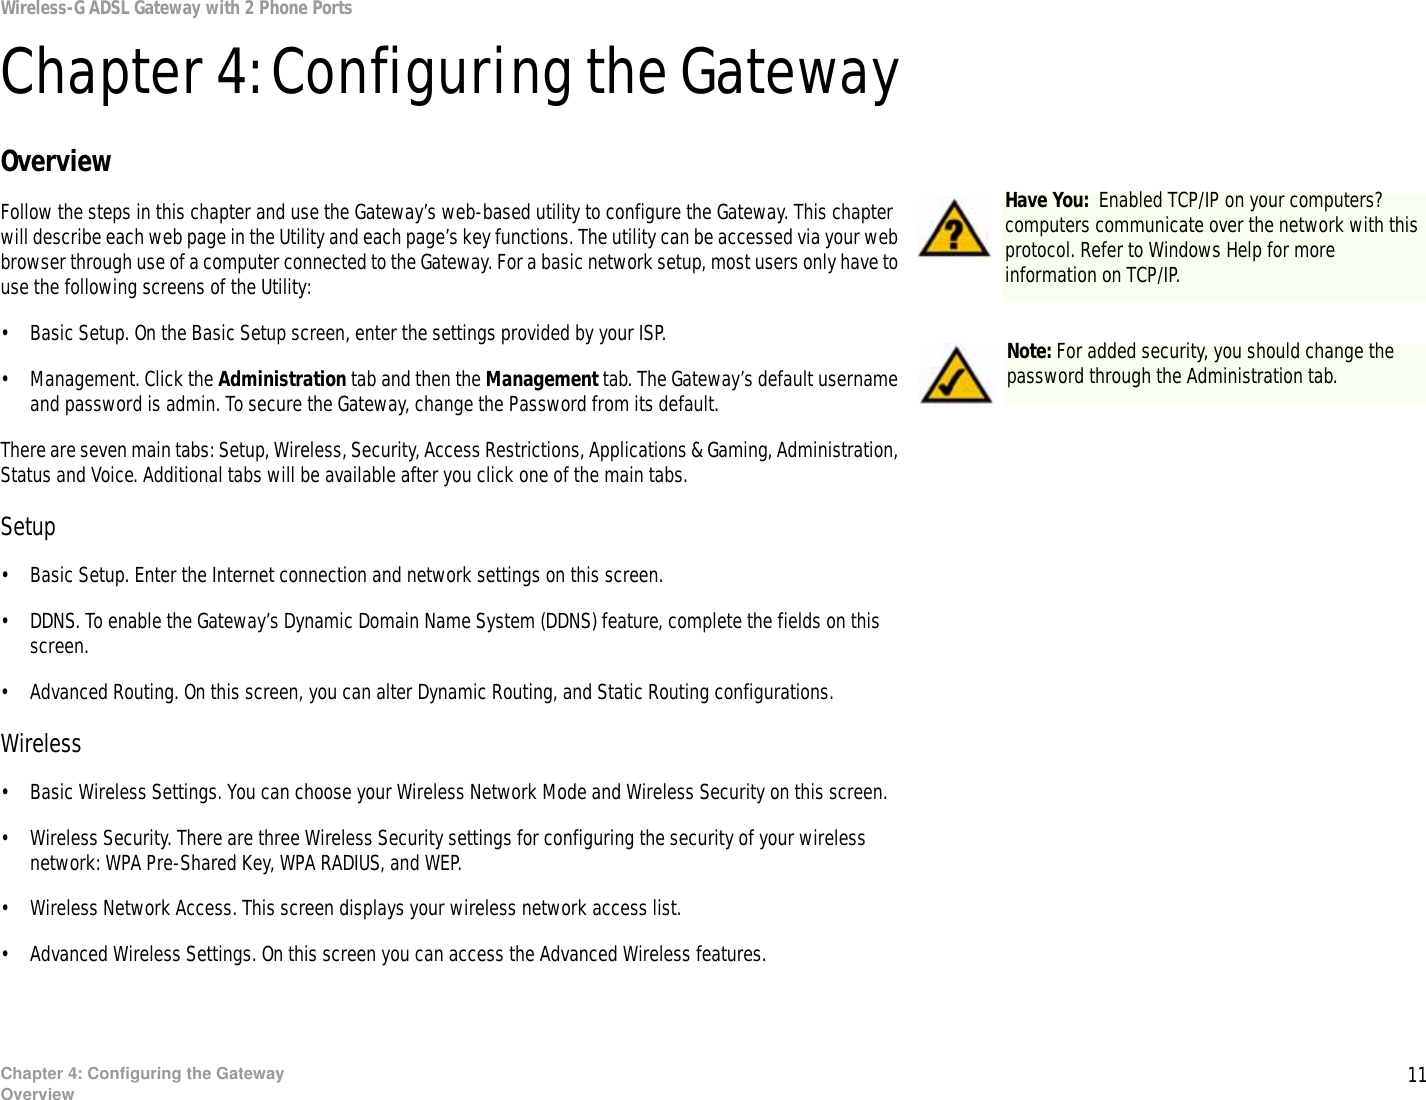 11Chapter 4: Configuring the GatewayOverviewWireless-G ADSL Gateway with 2 Phone PortsChapter 4: Configuring the GatewayOverviewFollow the steps in this chapter and use the Gateway’s web-based utility to configure the Gateway. This chapter will describe each web page in the Utility and each page’s key functions. The utility can be accessed via your web browser through use of a computer connected to the Gateway. For a basic network setup, most users only have to use the following screens of the Utility:• Basic Setup. On the Basic Setup screen, enter the settings provided by your ISP.• Management. Click the Administration tab and then the Management tab. The Gateway’s default username and password is admin. To secure the Gateway, change the Password from its default.There are seven main tabs: Setup, Wireless, Security, Access Restrictions, Applications &amp; Gaming, Administration, Status and Voice. Additional tabs will be available after you click one of the main tabs.Setup• Basic Setup. Enter the Internet connection and network settings on this screen.• DDNS. To enable the Gateway’s Dynamic Domain Name System (DDNS) feature, complete the fields on this screen.• Advanced Routing. On this screen, you can alter Dynamic Routing, and Static Routing configurations.Wireless• Basic Wireless Settings. You can choose your Wireless Network Mode and Wireless Security on this screen.• Wireless Security. There are three Wireless Security settings for configuring the security of your wireless network: WPA Pre-Shared Key, WPA RADIUS, and WEP.• Wireless Network Access. This screen displays your wireless network access list.• Advanced Wireless Settings. On this screen you can access the Advanced Wireless features. Note: For added security, you should change the password through the Administration tab.Have You:  Enabled TCP/IP on your computers? computers communicate over the network with this protocol. Refer to Windows Help for more information on TCP/IP.